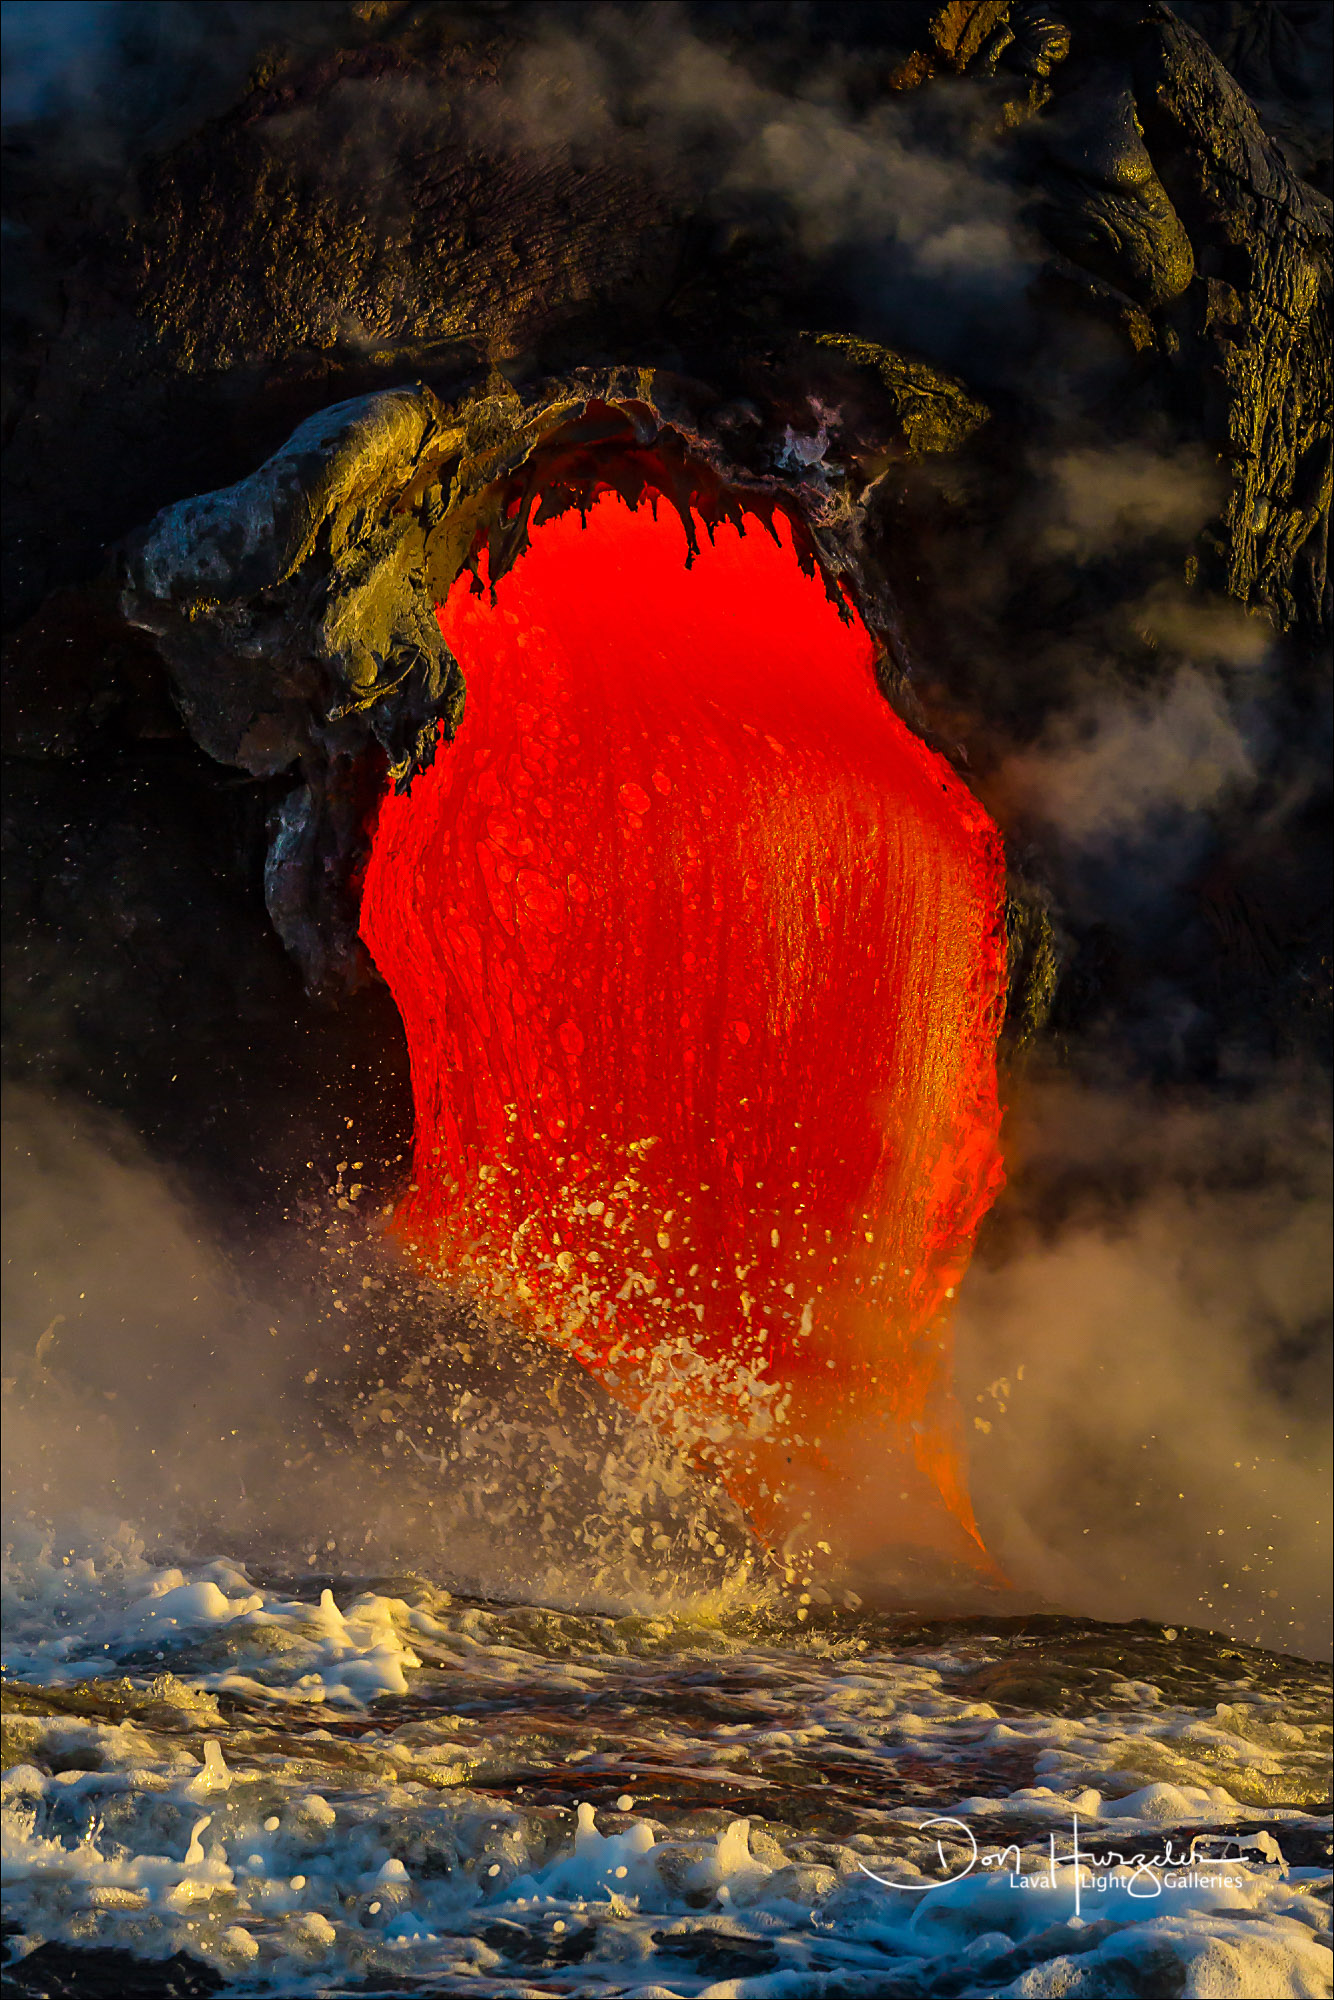 A huge amount of liquid lava pouring from a lava tube and into the sea.